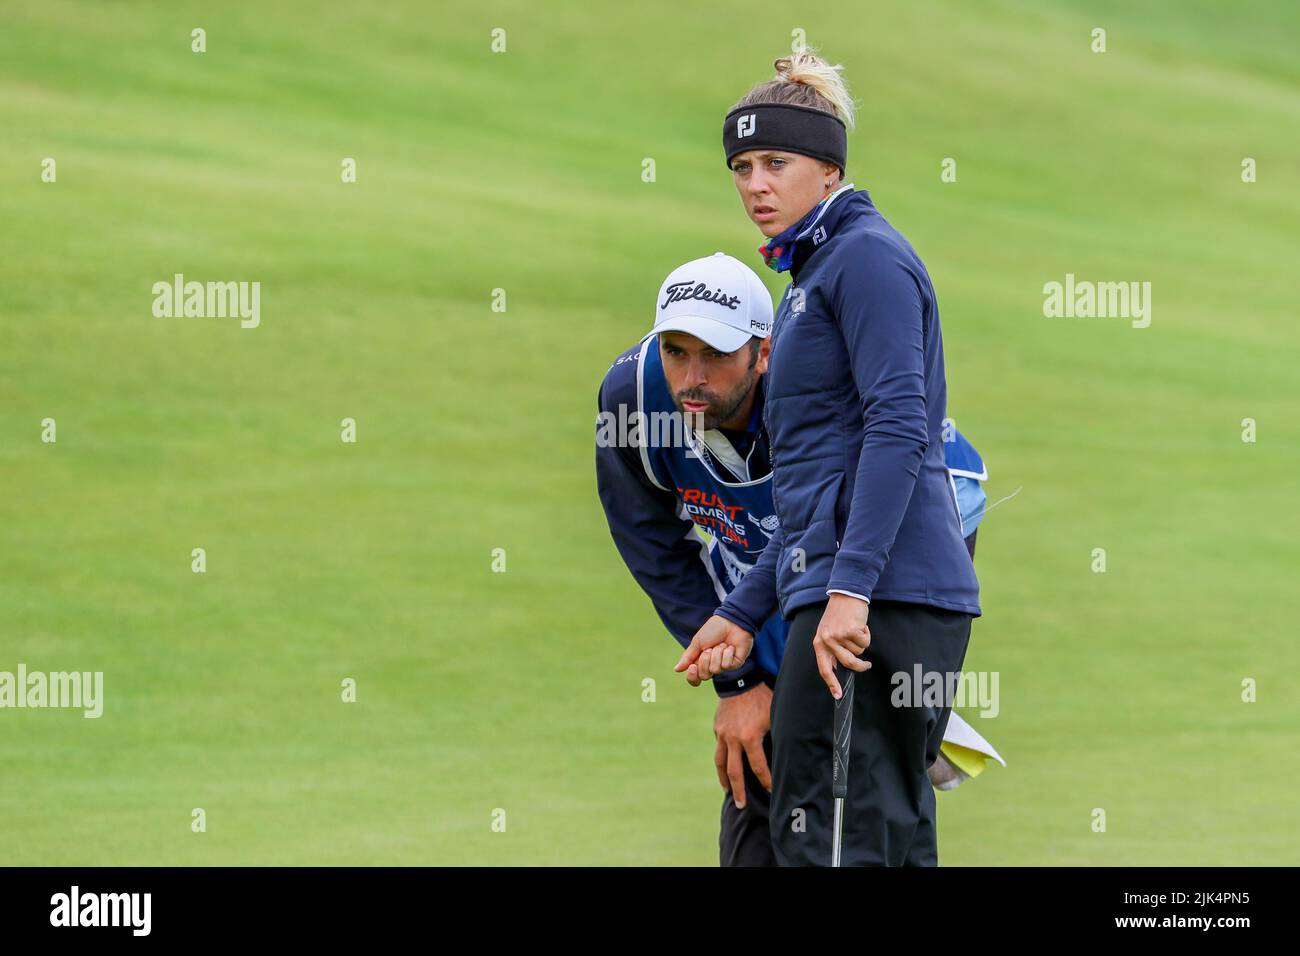 Irvine, UK. 30th July, 2022. The third round of the Trust Golf Women's Scottish Golf took place with 75 players making the cut. Heavy overnight rain from Friday into Saturday made for a softer and more testing course. Pauline Rousin and her caddie checking the putting line at the 5th green. Credit: Findlay/Alamy Live News Stock Photo